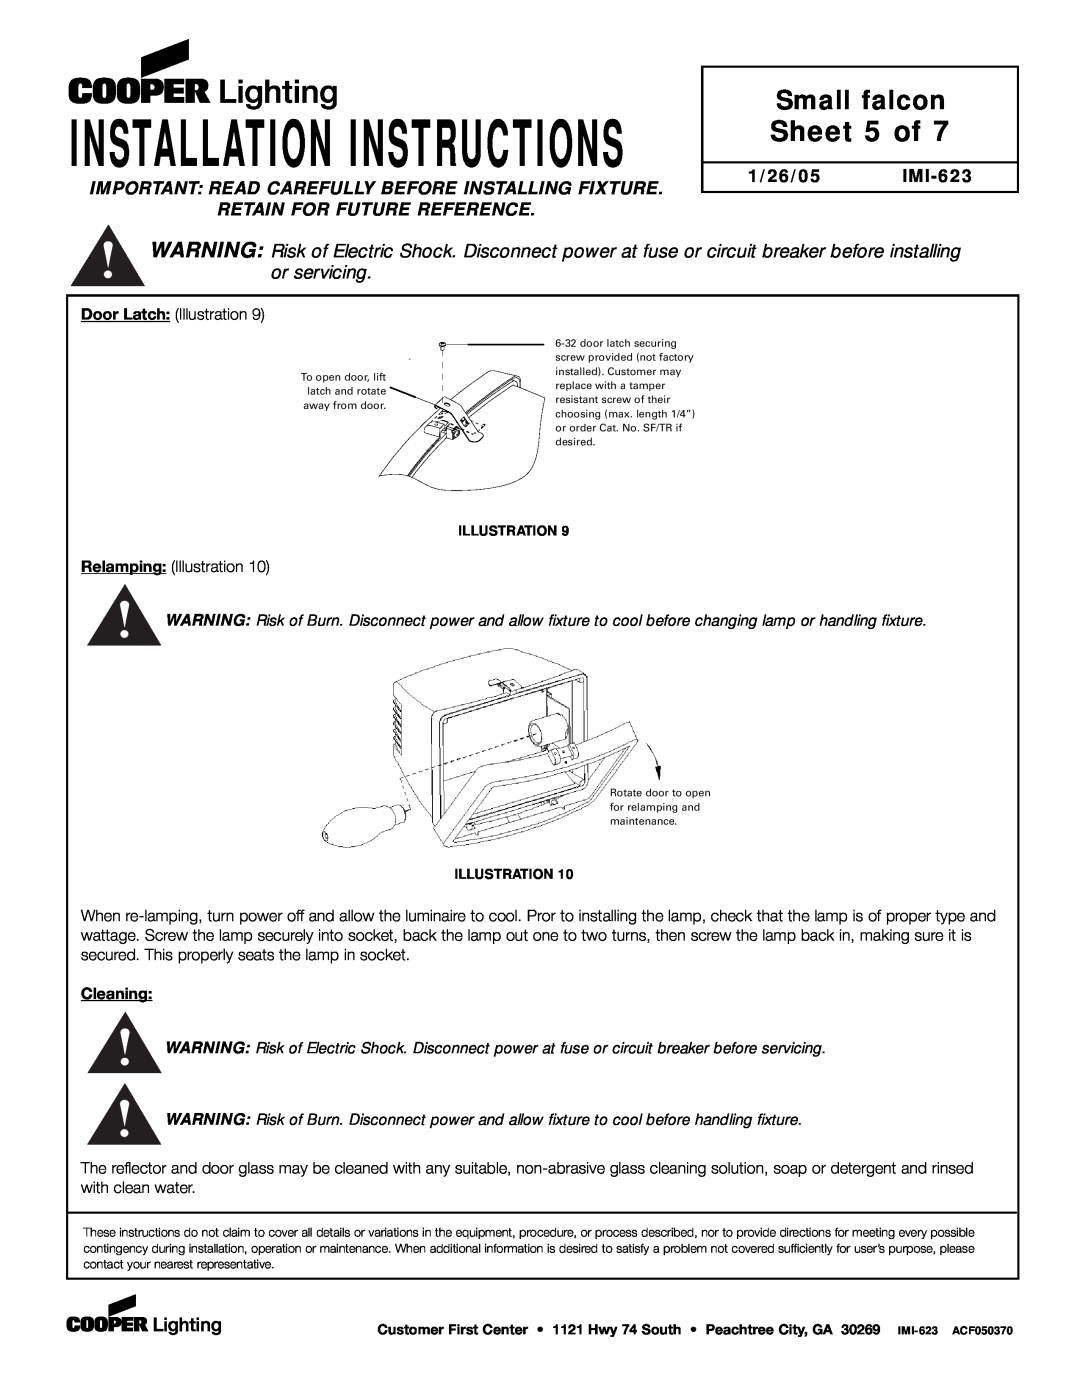 Cooper Lighting P4GE-MX Sheet 5 of, Installation Instructions, Small falcon, Retain For Future Reference, 1/26/05 IMI-623 